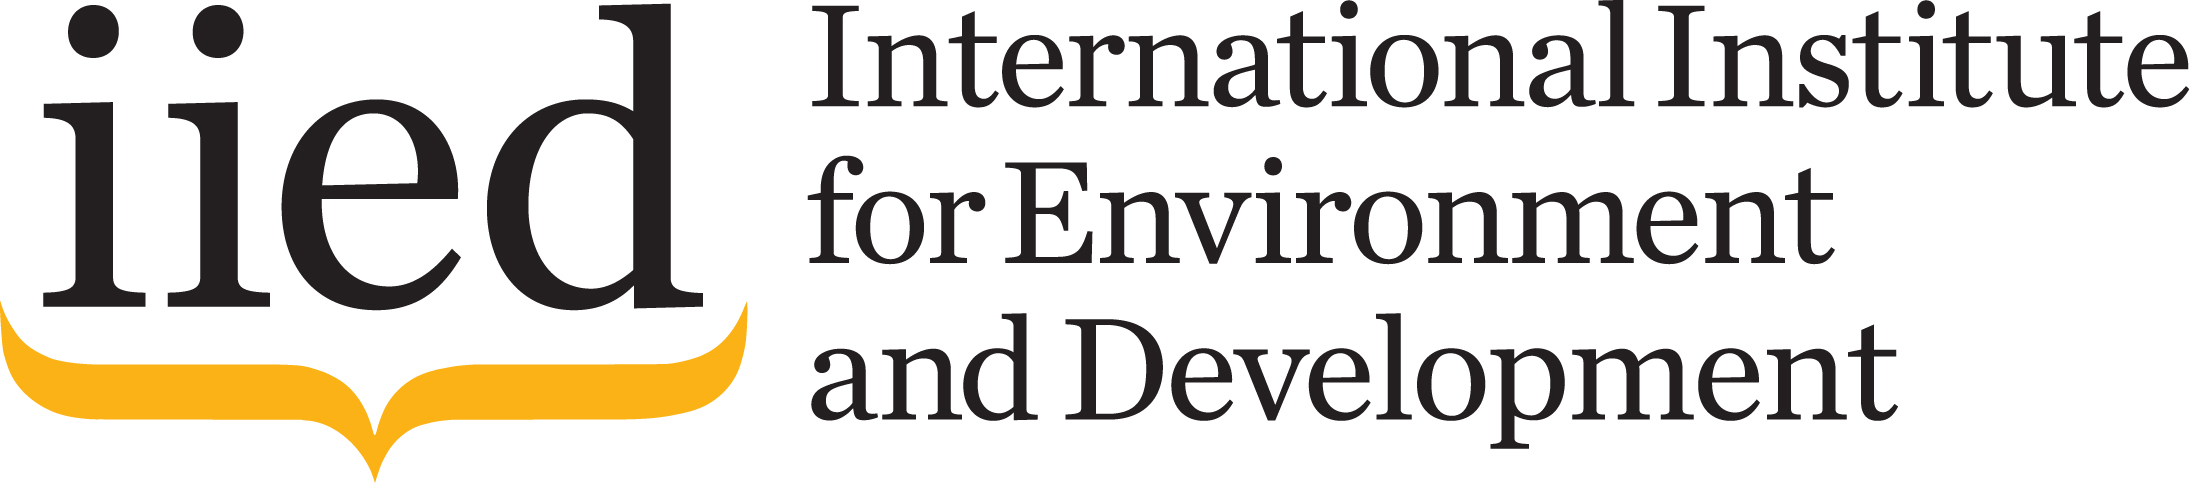  International Institute for Environment and Development (IIED)